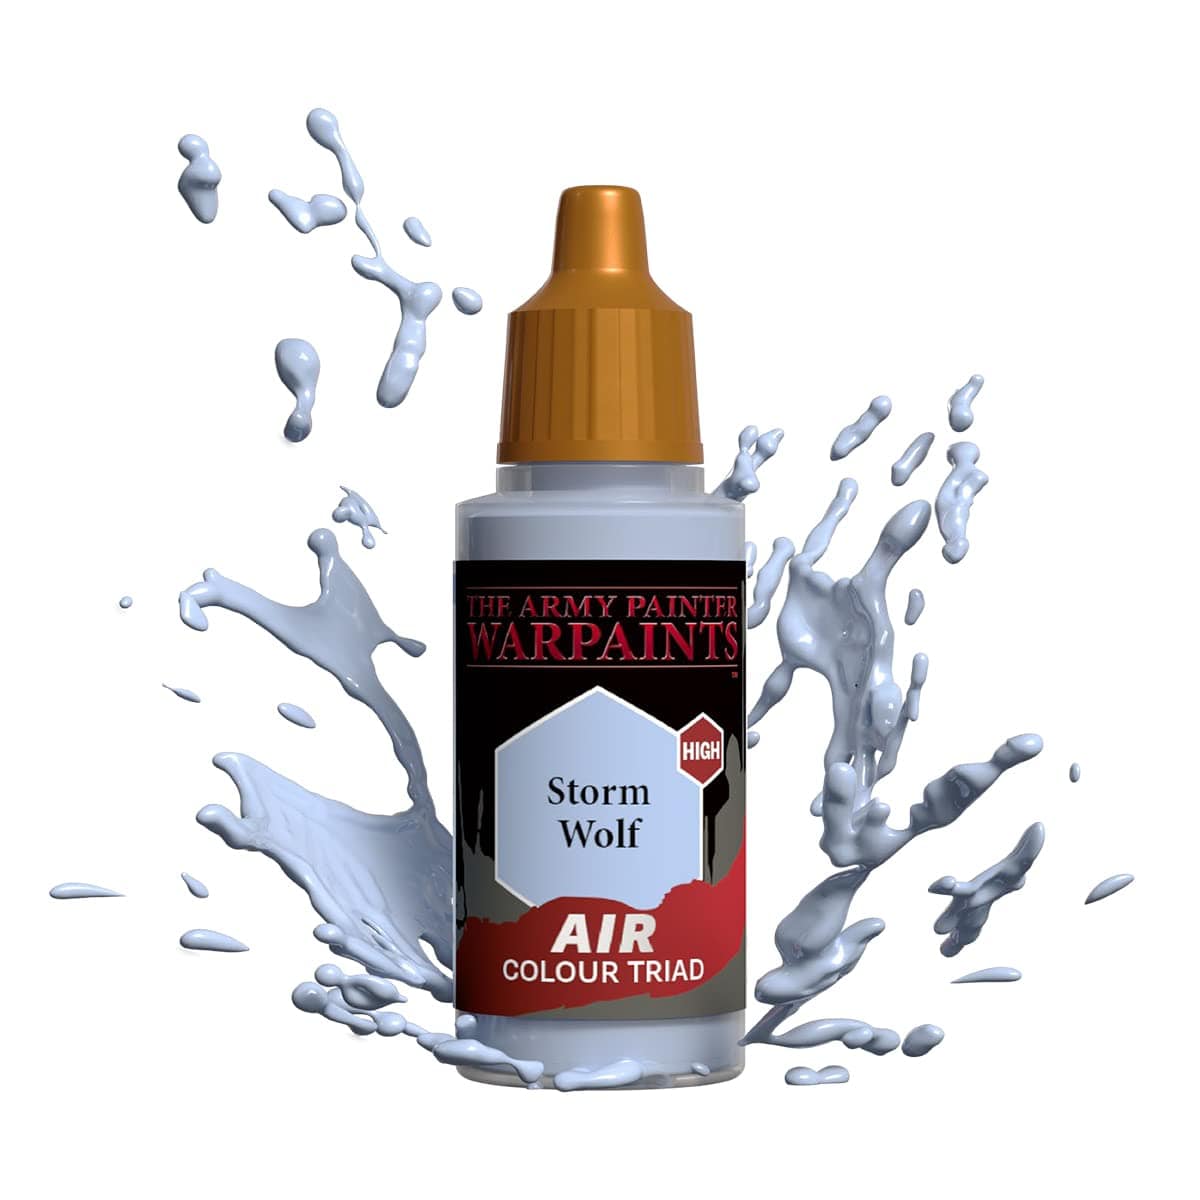 The Army Painter Accessories The Army Painter Warpaints Air: Storm Wolf 18ml